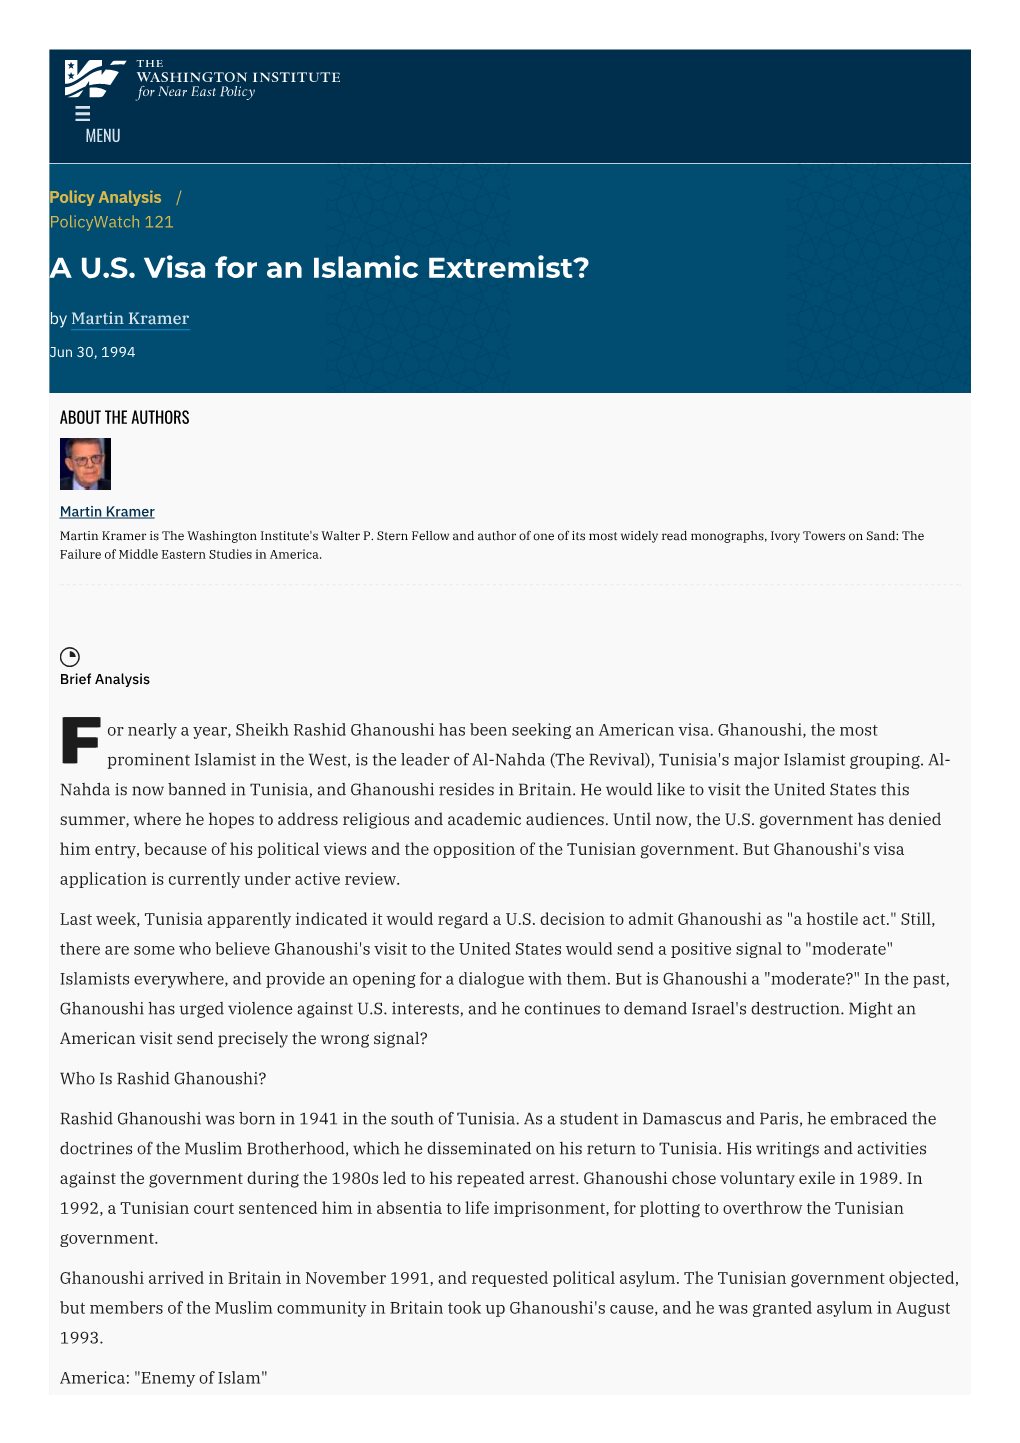 A U.S. Visa for an Islamic Extremist? | the Washington Institute